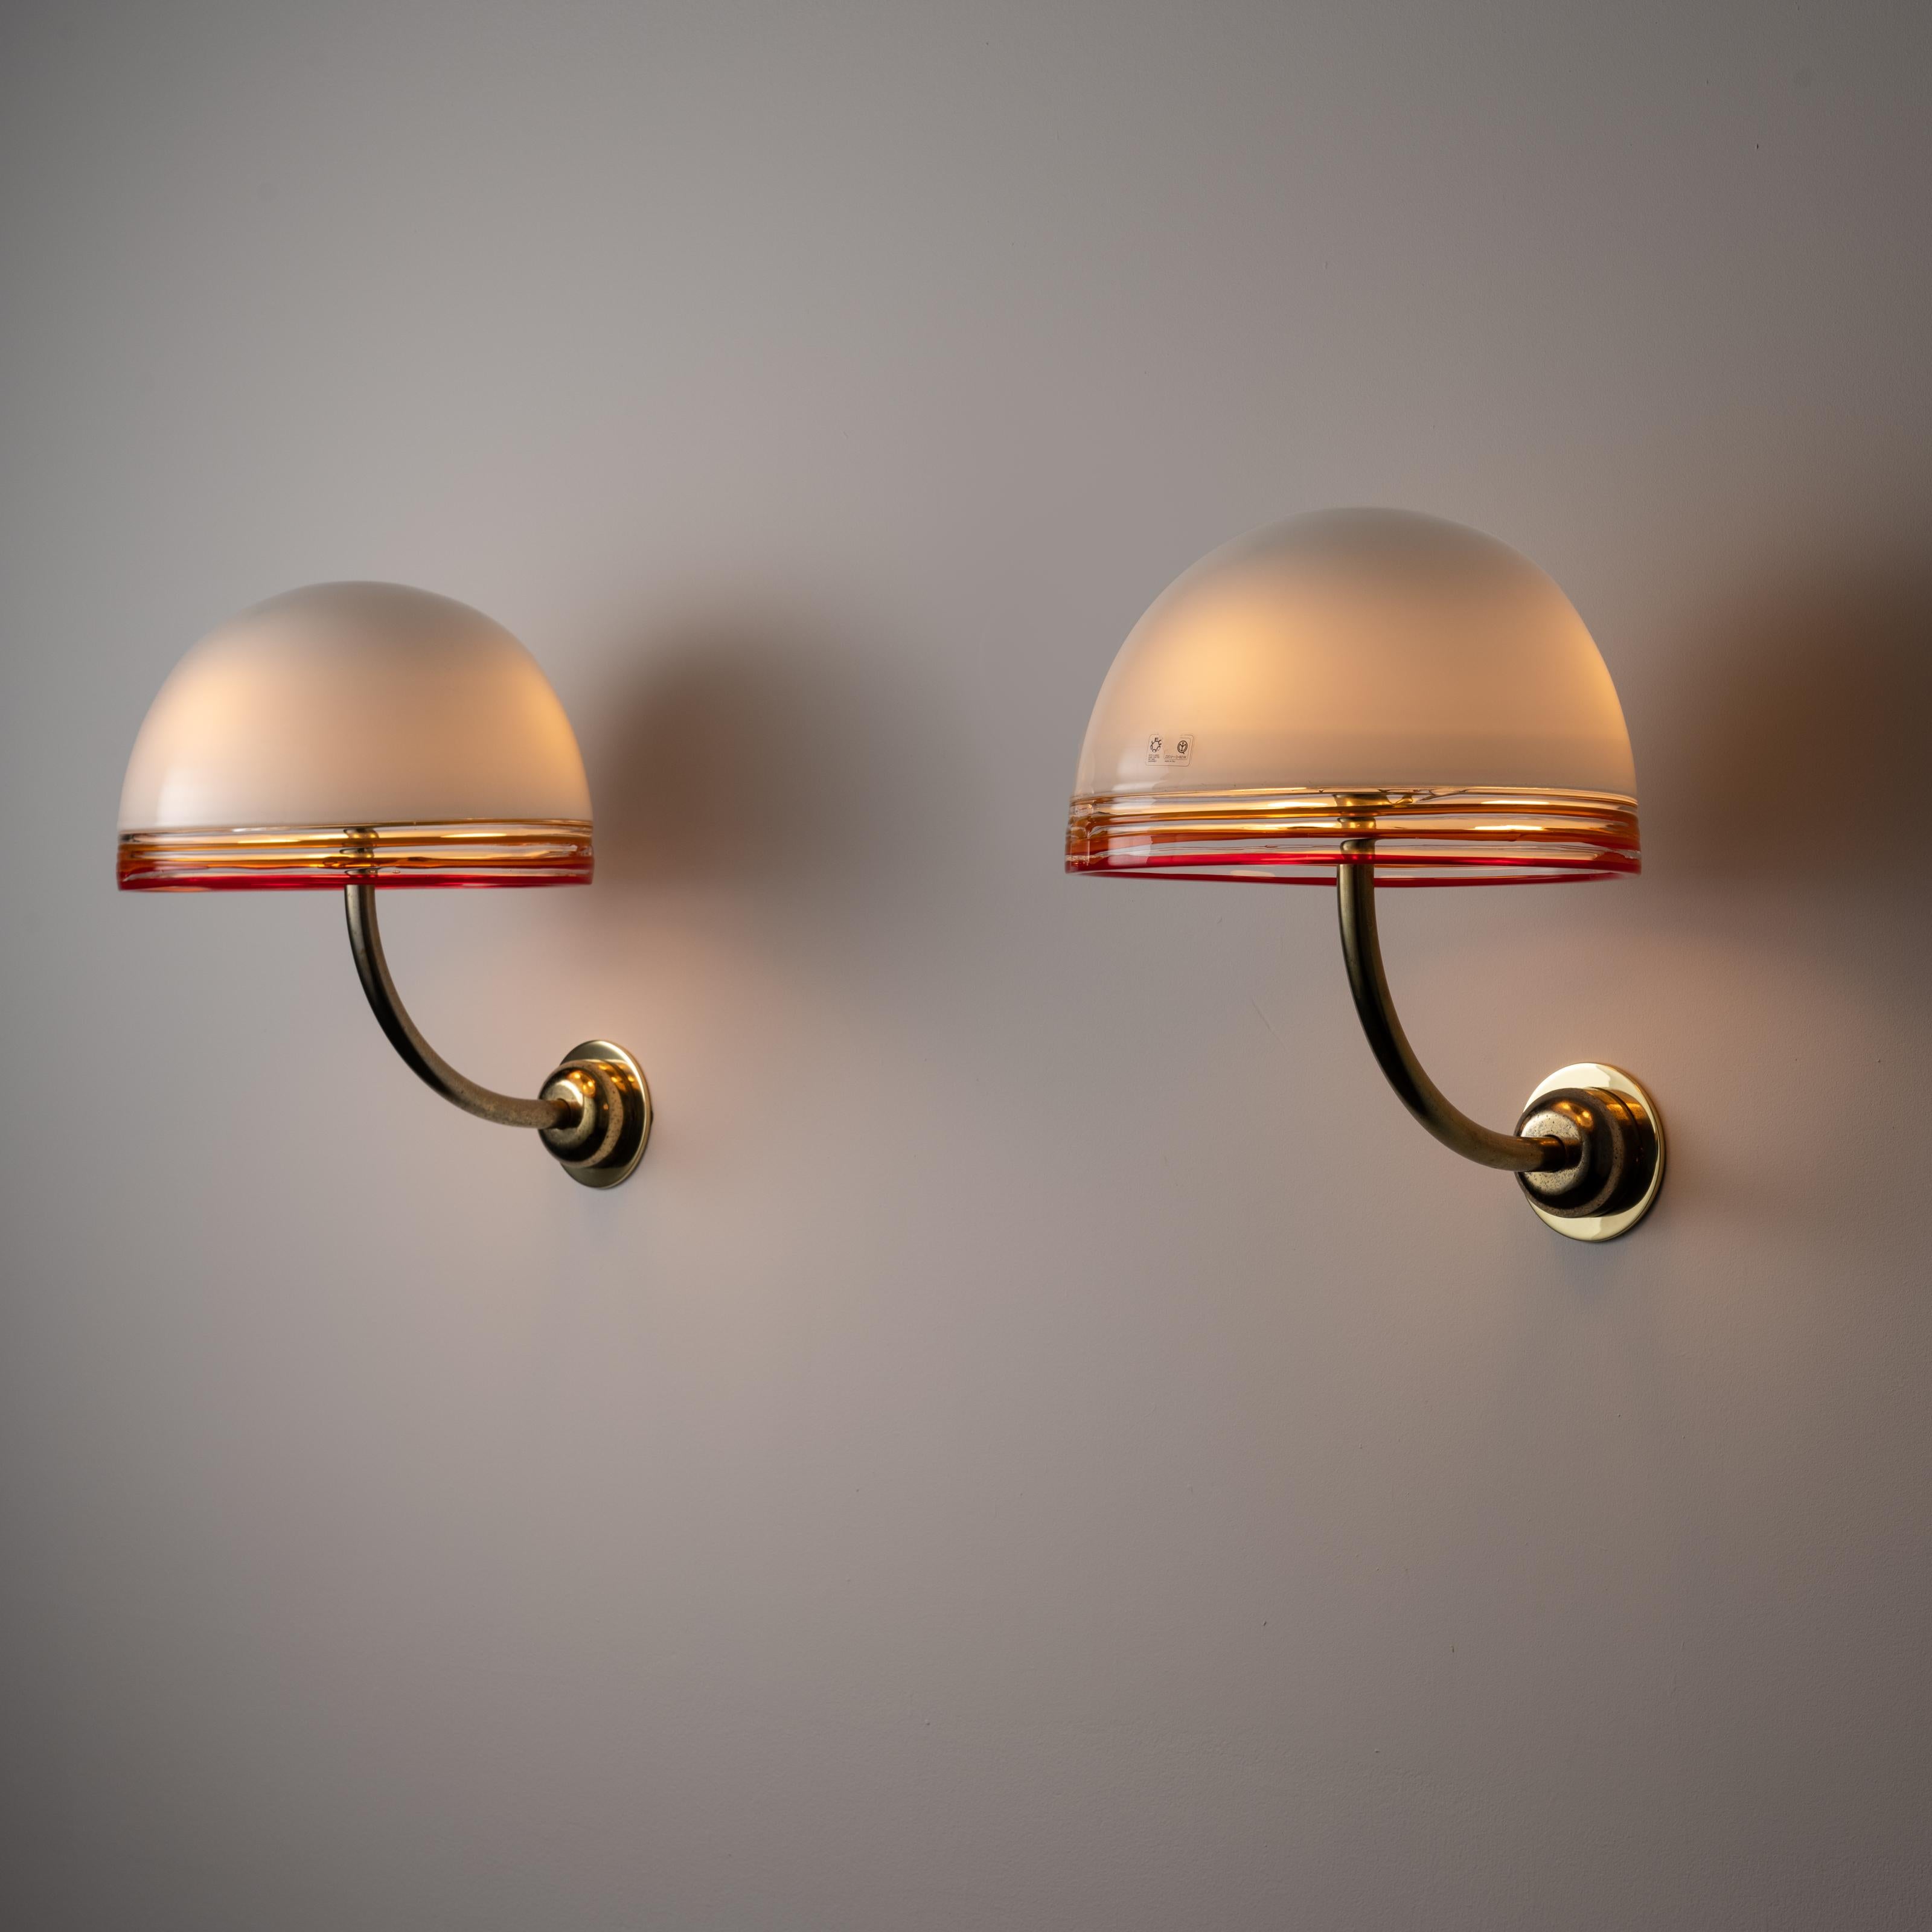 Pair of wall lamps by Roberto Pamio for Leucos. Designed and manufactured in Italy, circa 1970. Robust pair of wall sconces with upward sloping brass necks and frosted glass shades with orange and red ribbed accents on the lip of each shade. The